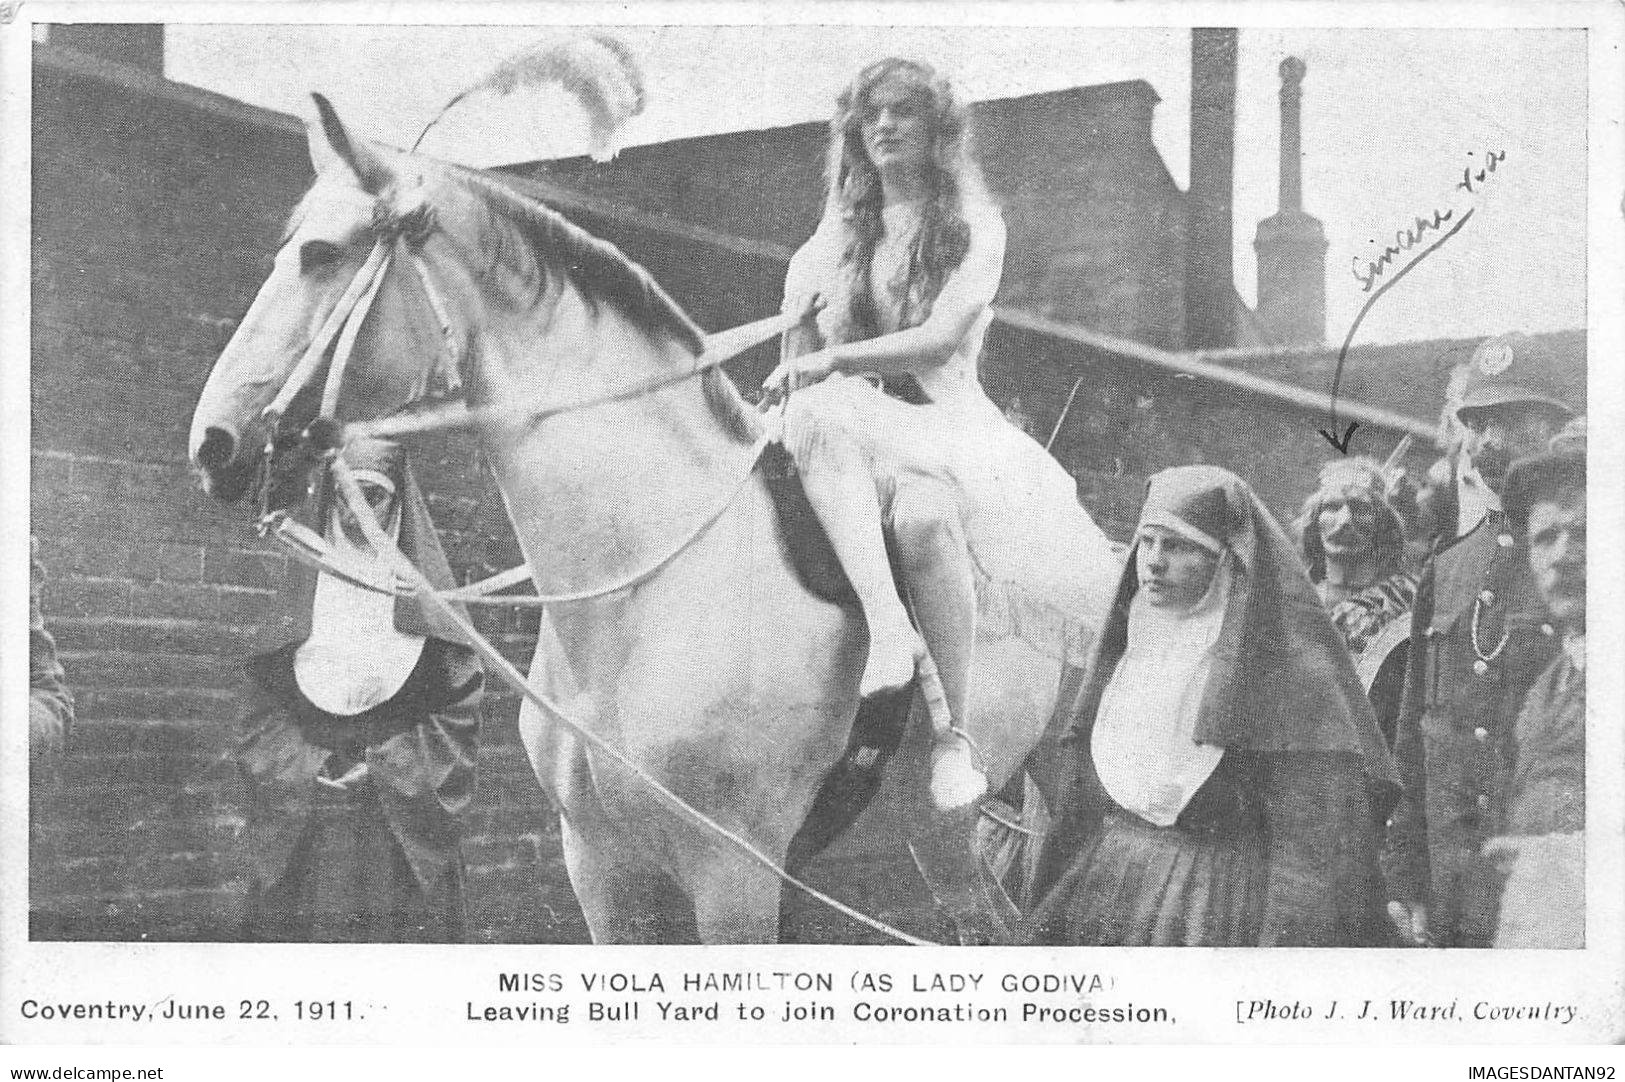 ANGLETERRE #MK43975 COVENTRY MISS VIOLA HAMILTON LEAVING BULL YARD TO JOIN CORONATION PROCESSION JUNE 22 1911 - Coventry